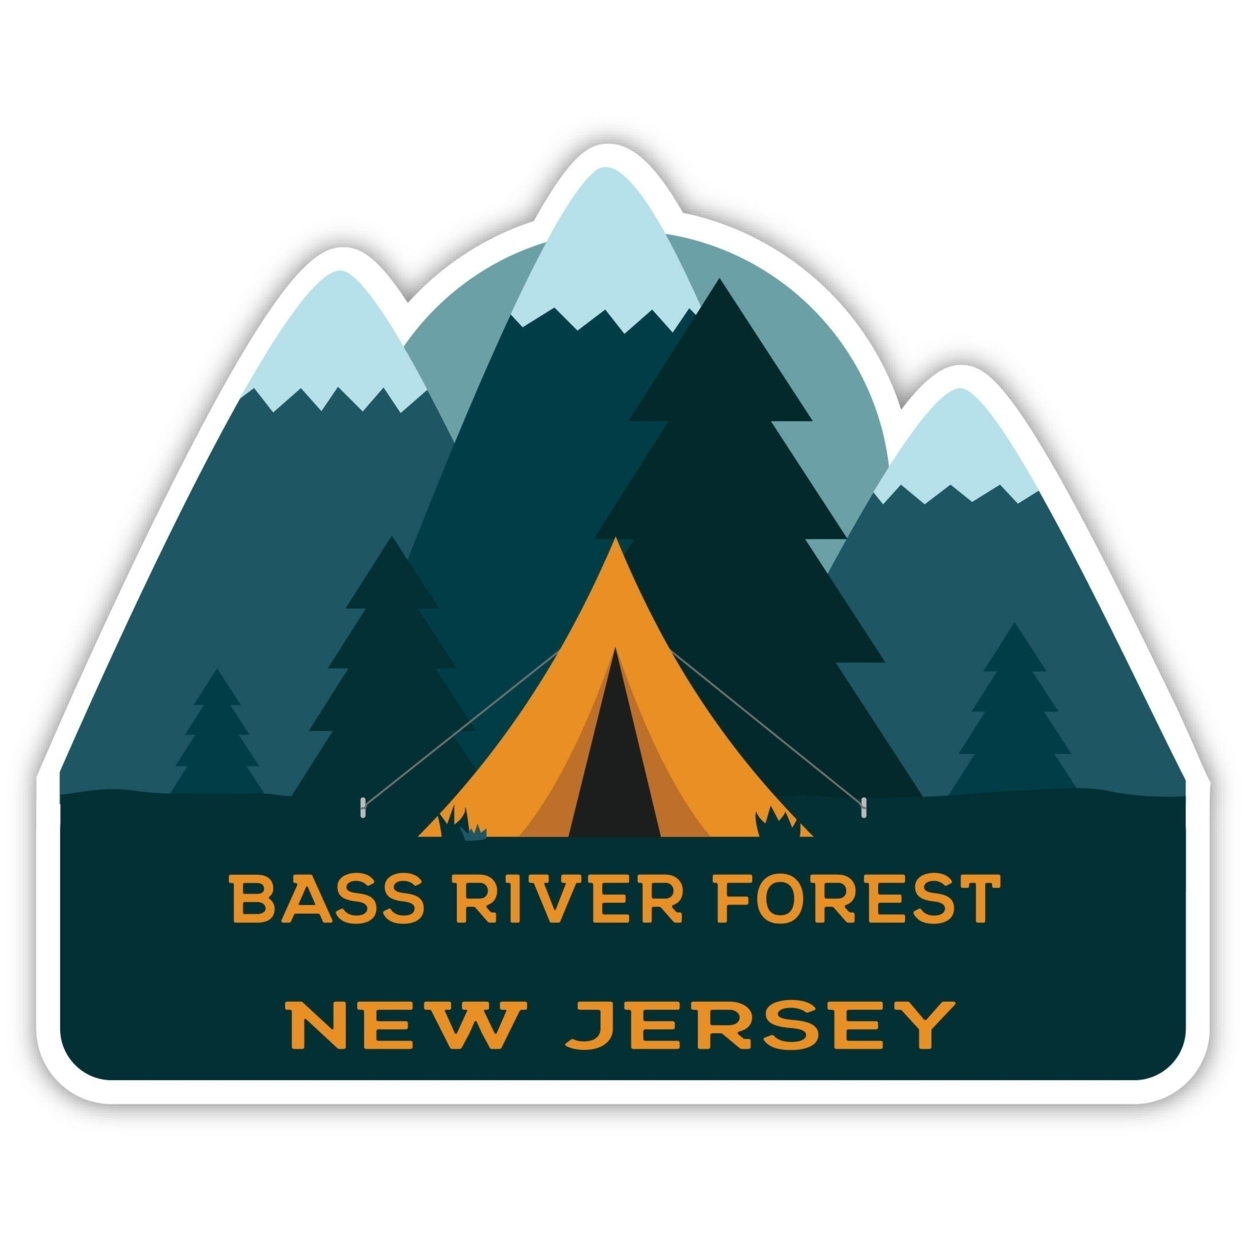 Bass River Forest New Jersey Souvenir Decorative Stickers (Choose Theme And Size) - 4-Pack, 12-Inch, Tent